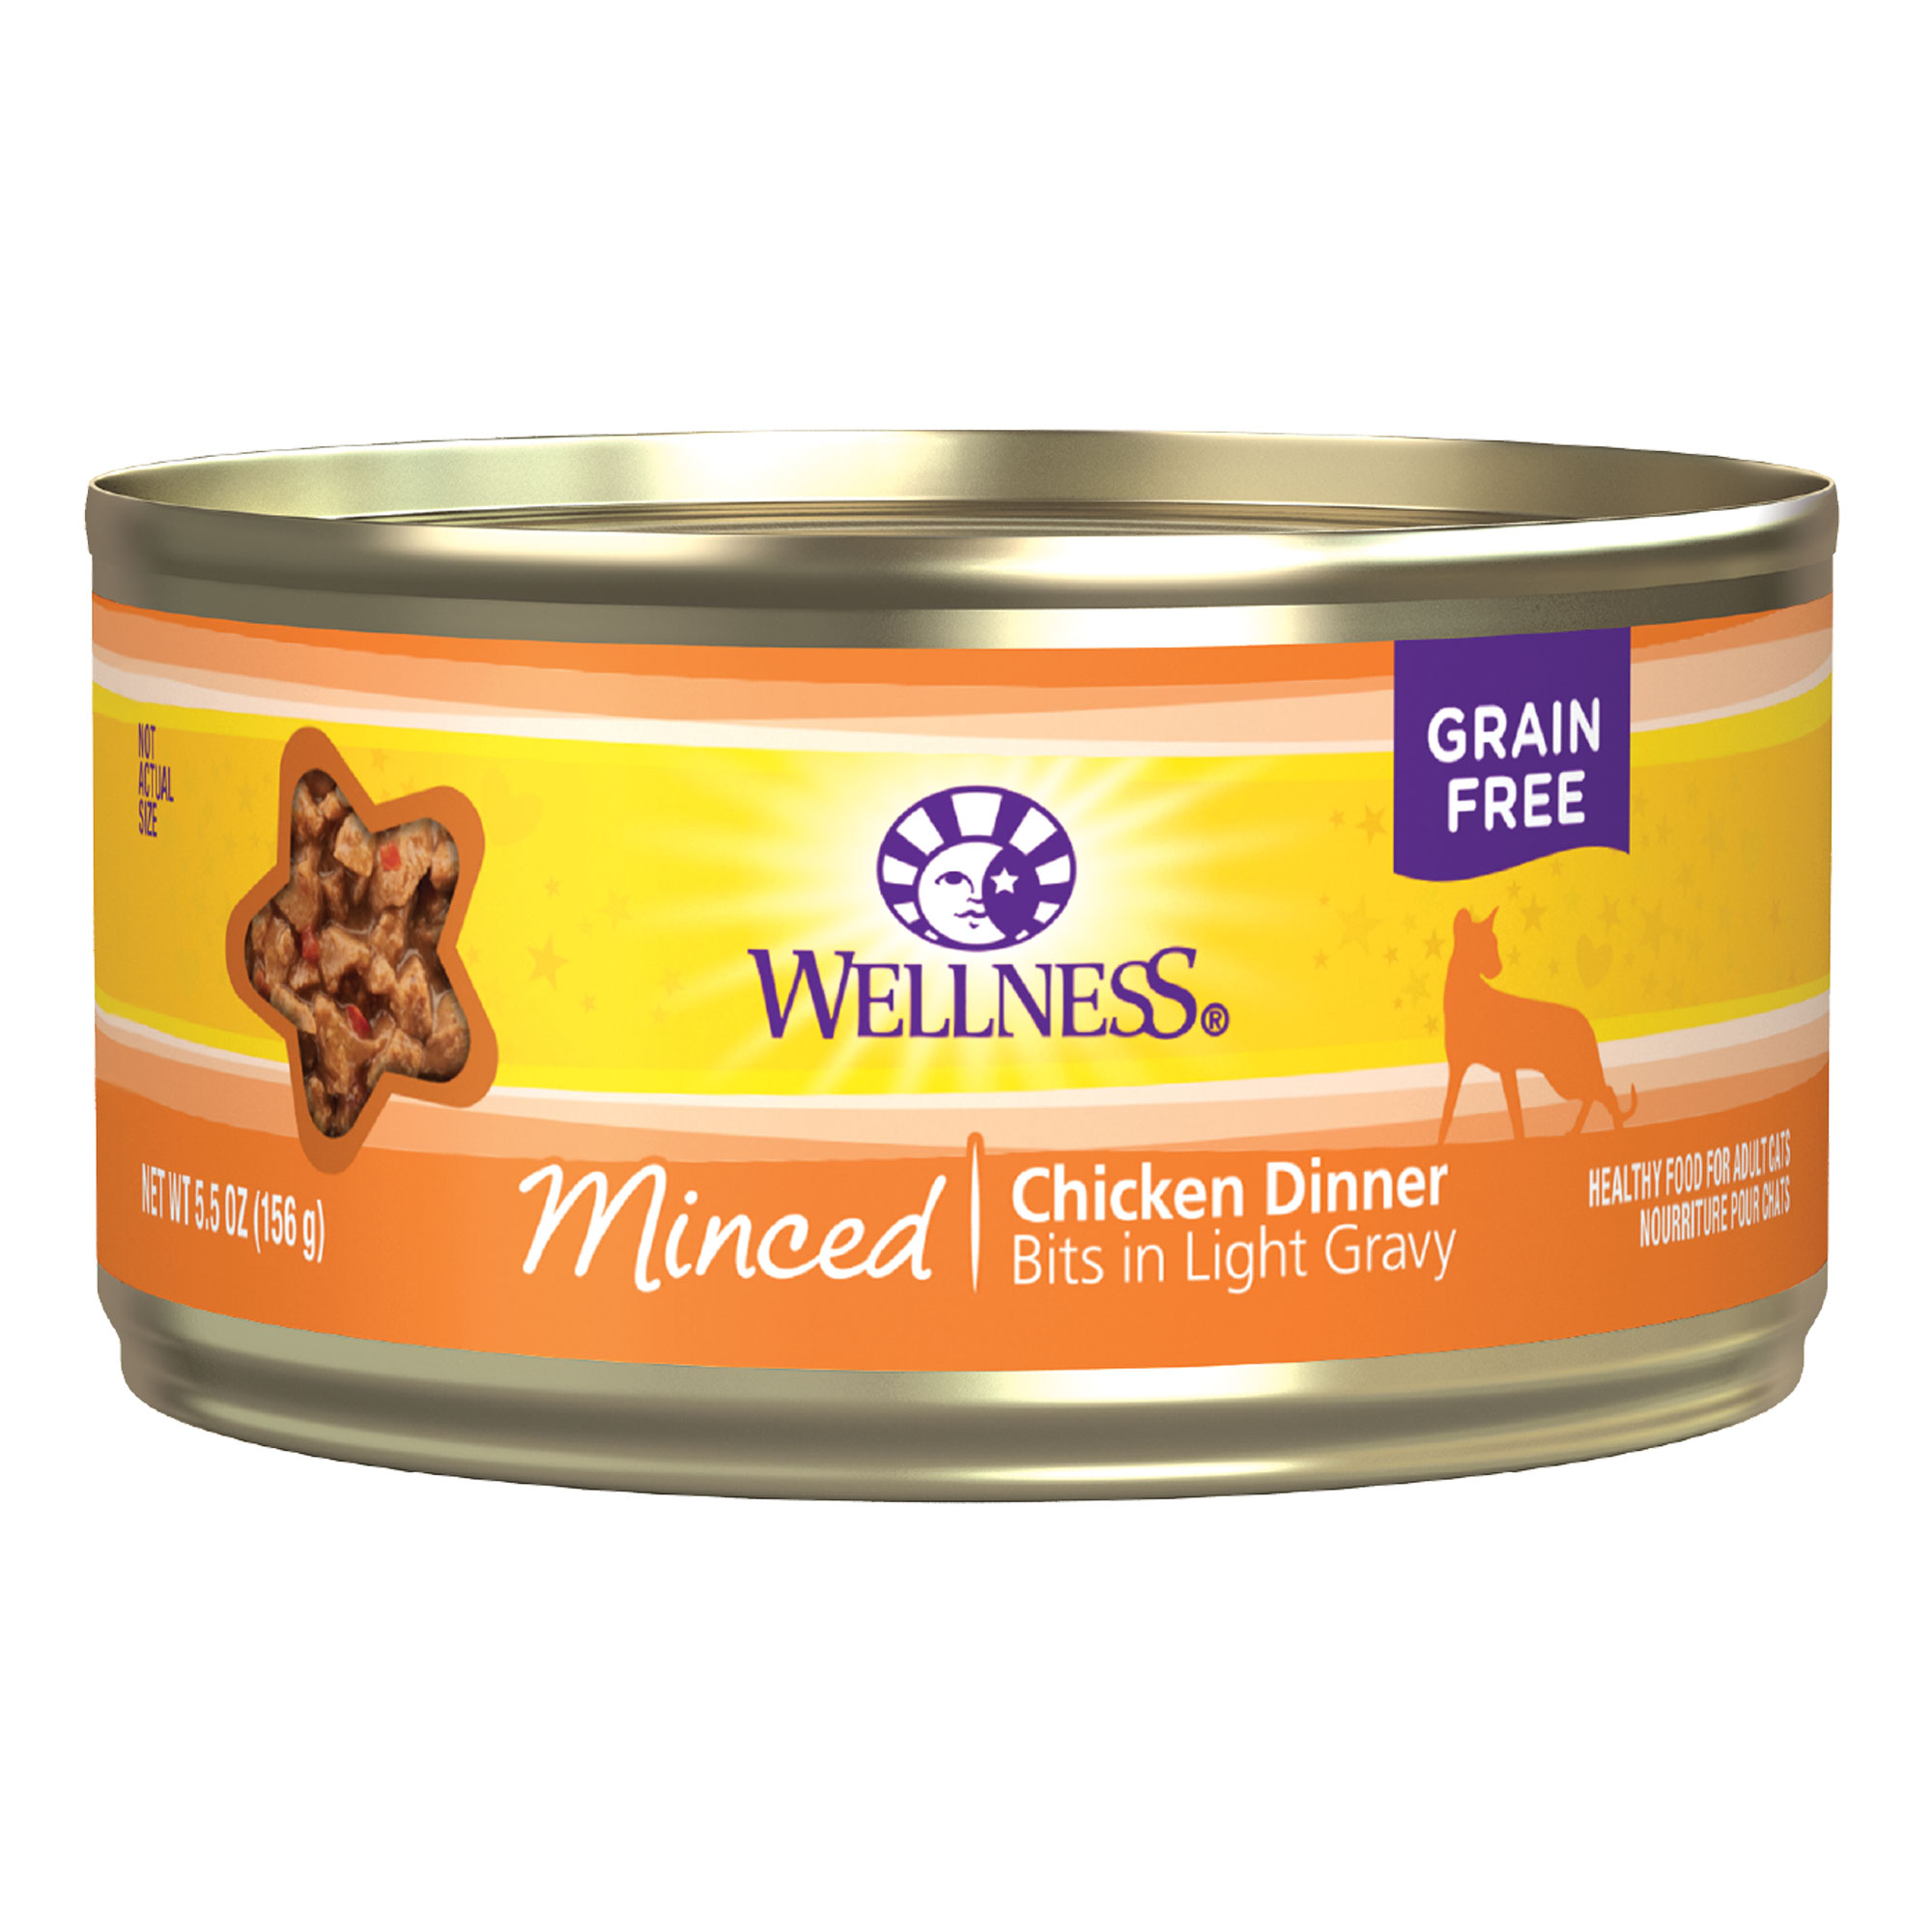 Wellness Complete Health Natural Grain Free Wet Canned Cat Food, Minced Chicken Entree, 5.5 Ounce Can (Pack of 24) - image 1 of 8